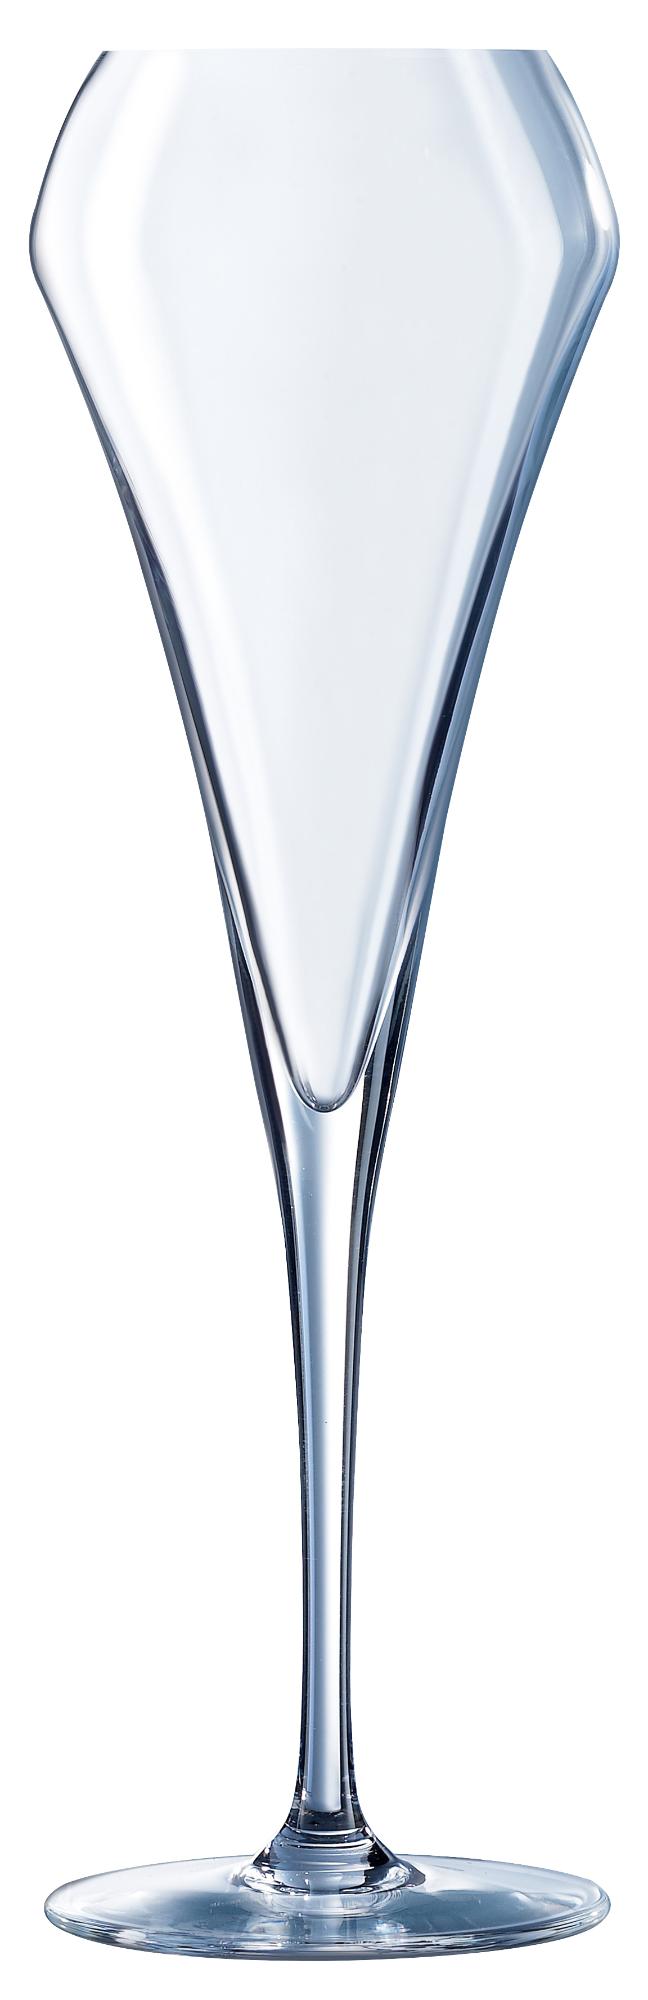 Open Up champagne glass, 200ml